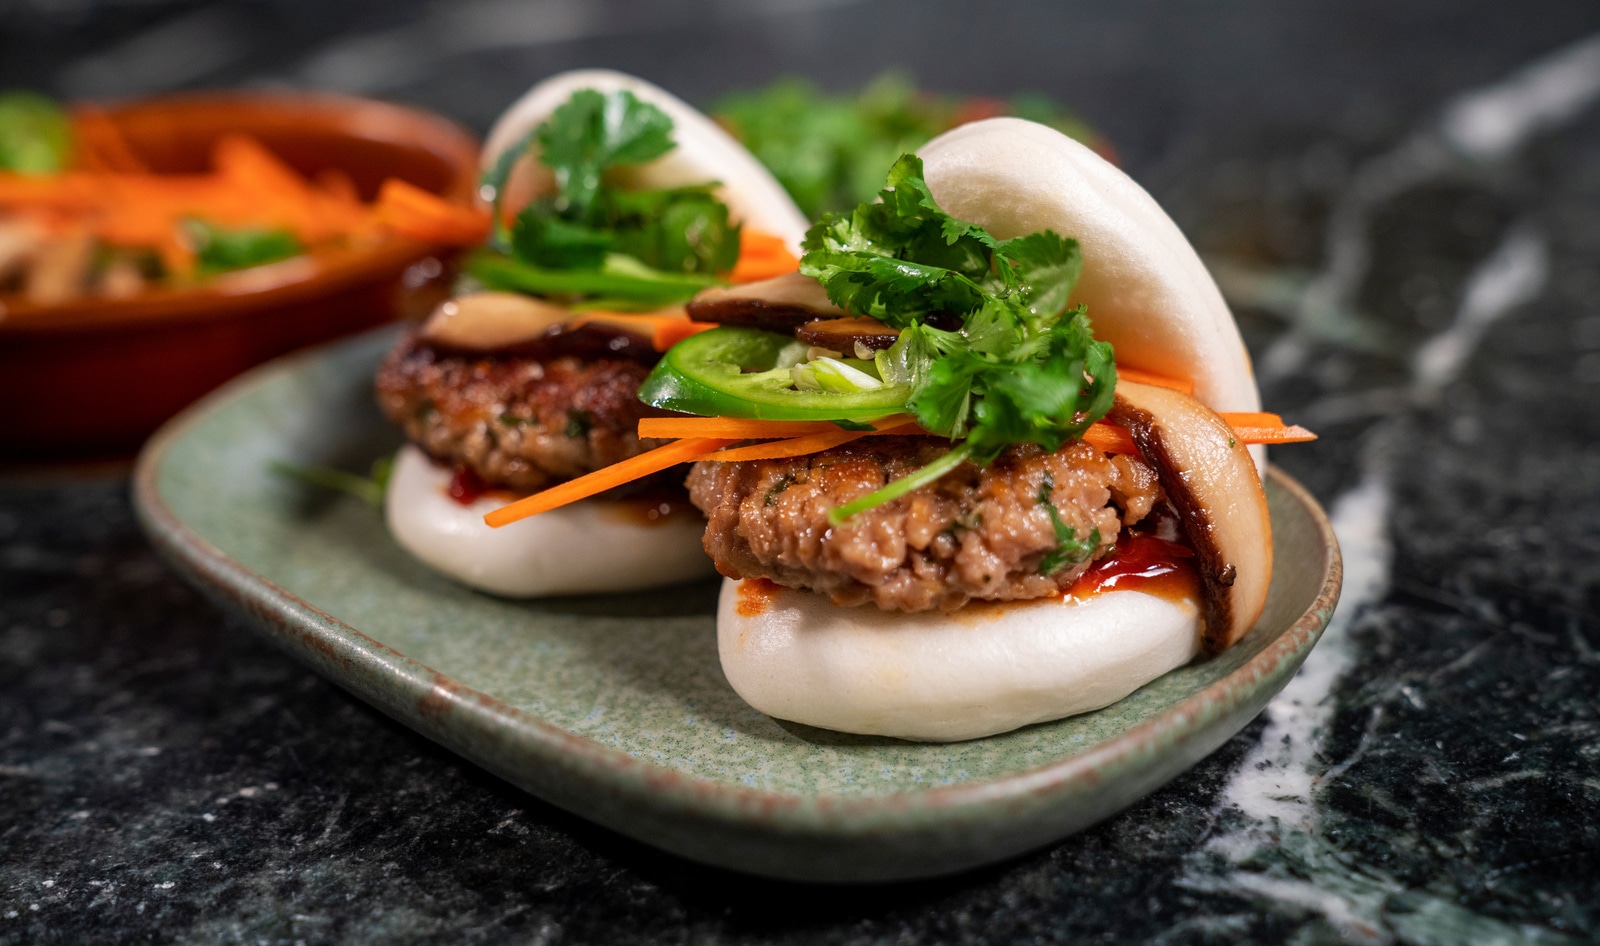 100 Hong Kong Restaurants Are Serving Vegan Impossible Pork. And 54 Percent of Locals Like It Better Than Meat.